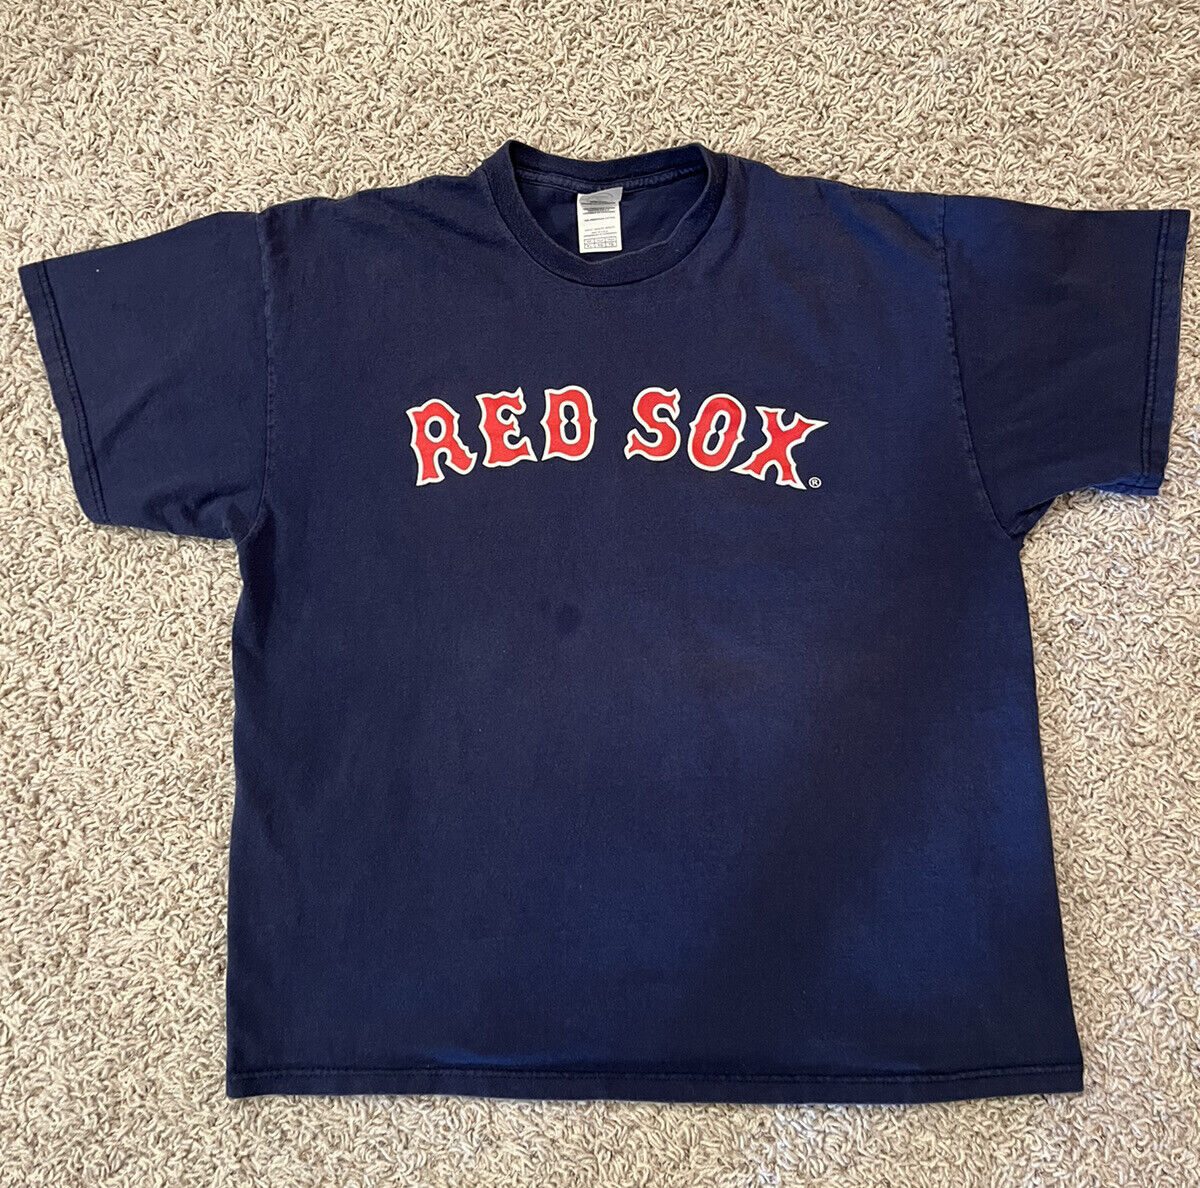 VINTAGE DUSTIN PEDROIA RED SOX TEE SHIRT (SIZE LARGE)